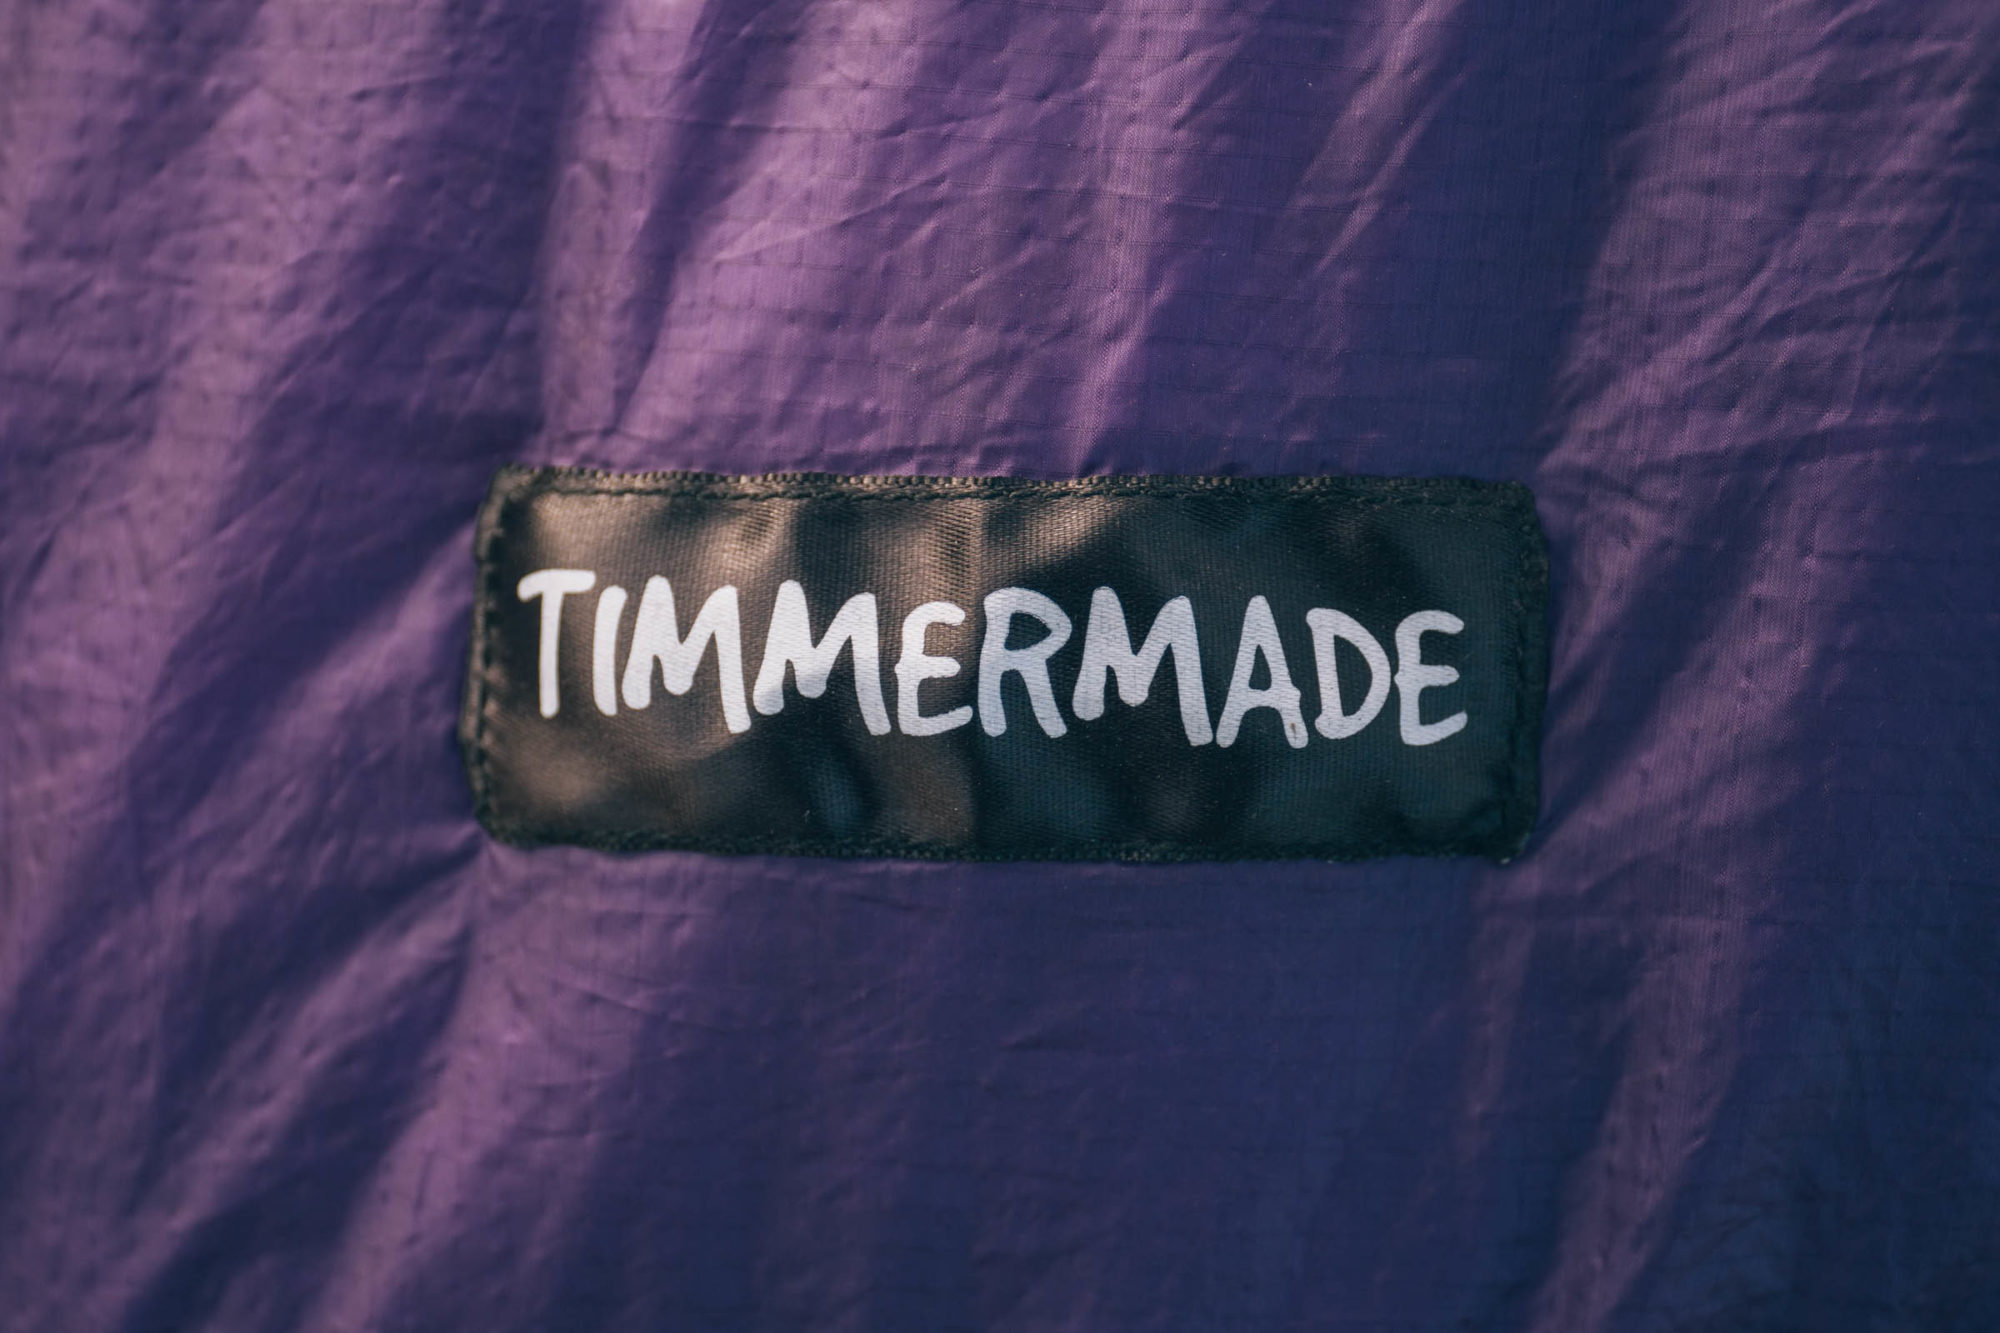 Timmermade Gear Review